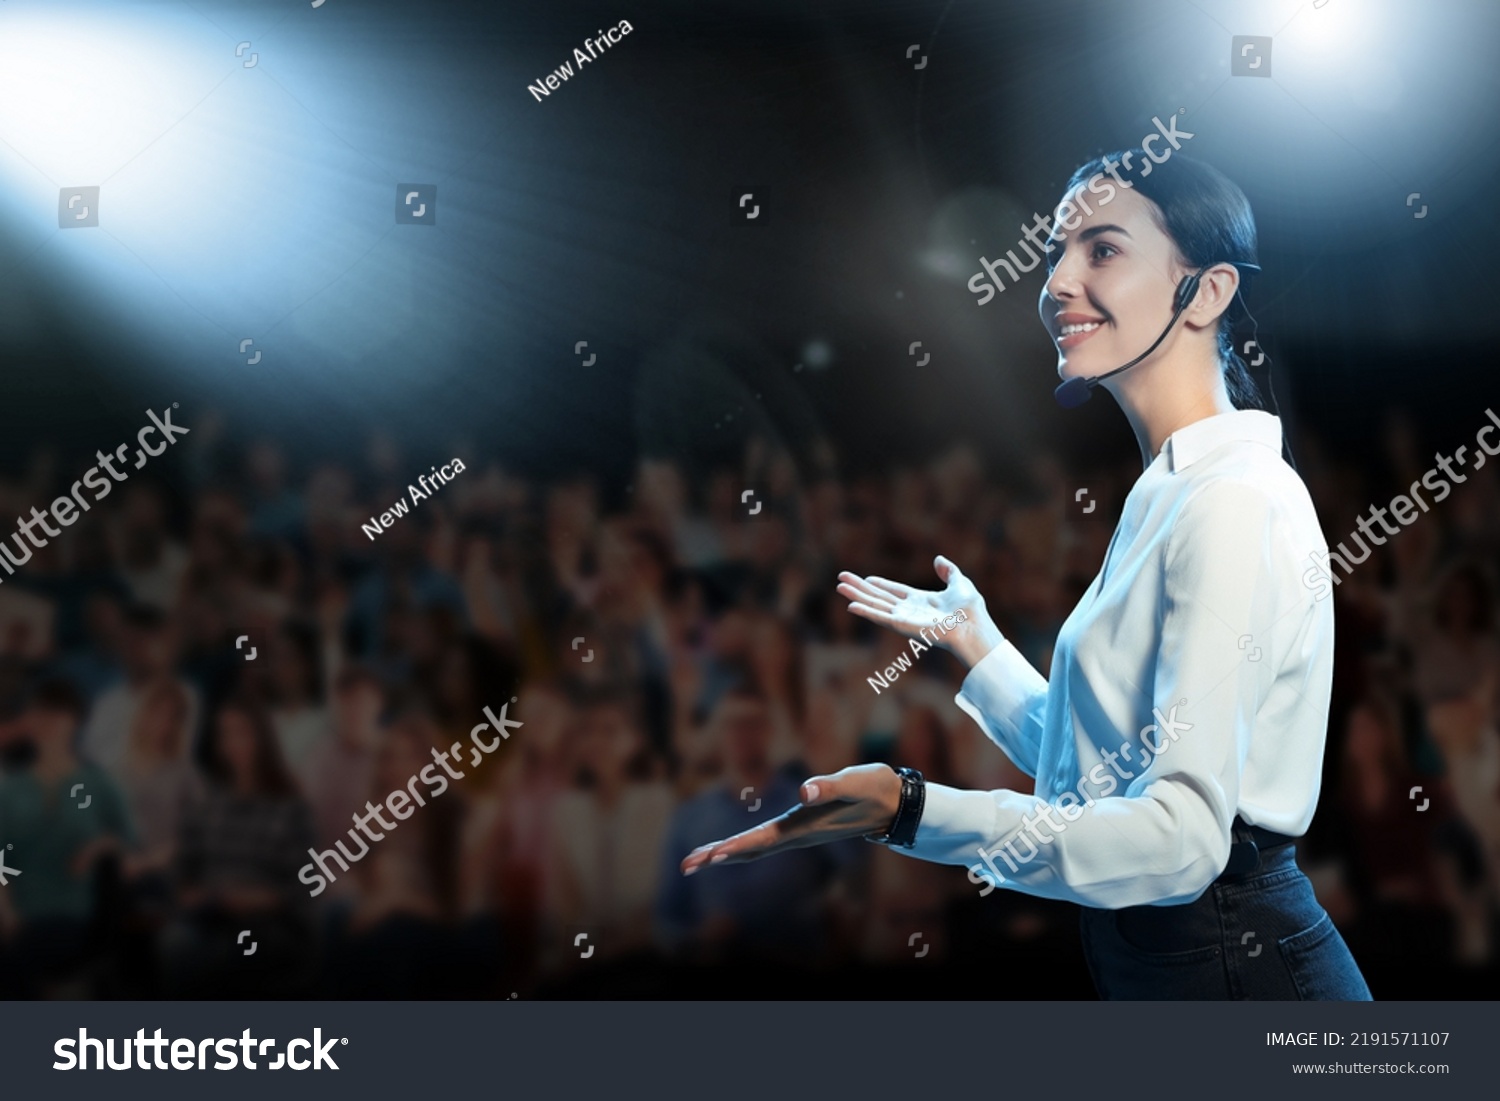 Motivational speaker with headset performing on stage #2191571107